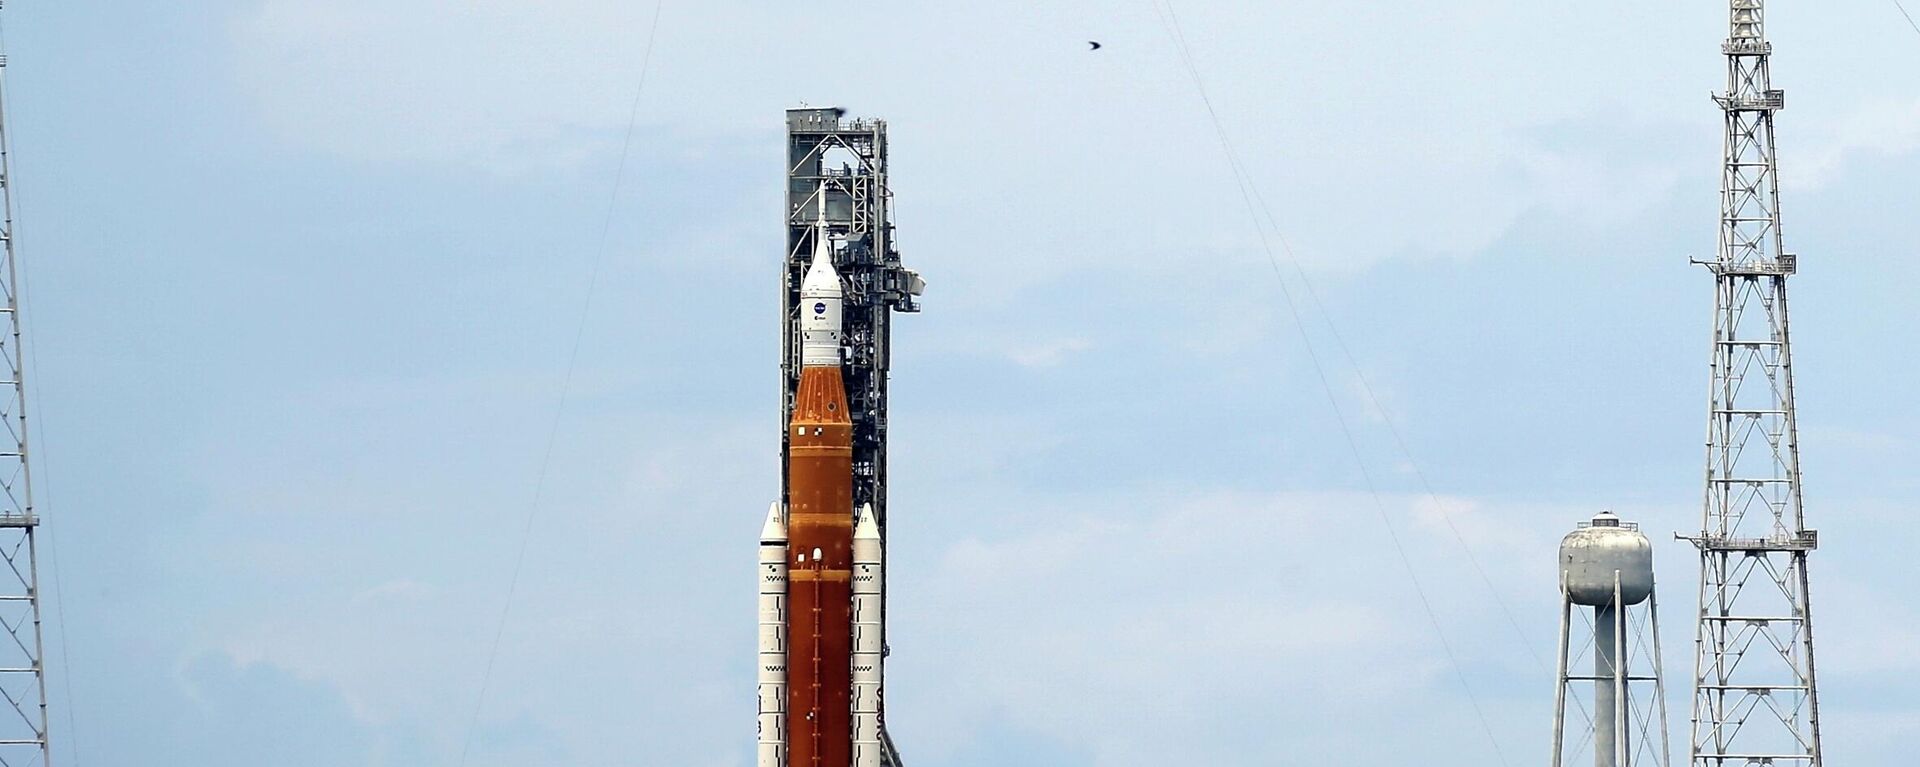 The NASA moon rocket stands ready less than 24 hours before it is scheduled to launch on Pad 39B for the Artemis 1 mission to orbit the moon at the Kennedy Space Center, Sunday, Aug. 28, 2022, in Cape Canaveral, Fla. - Sputnik International, 1920, 30.08.2022